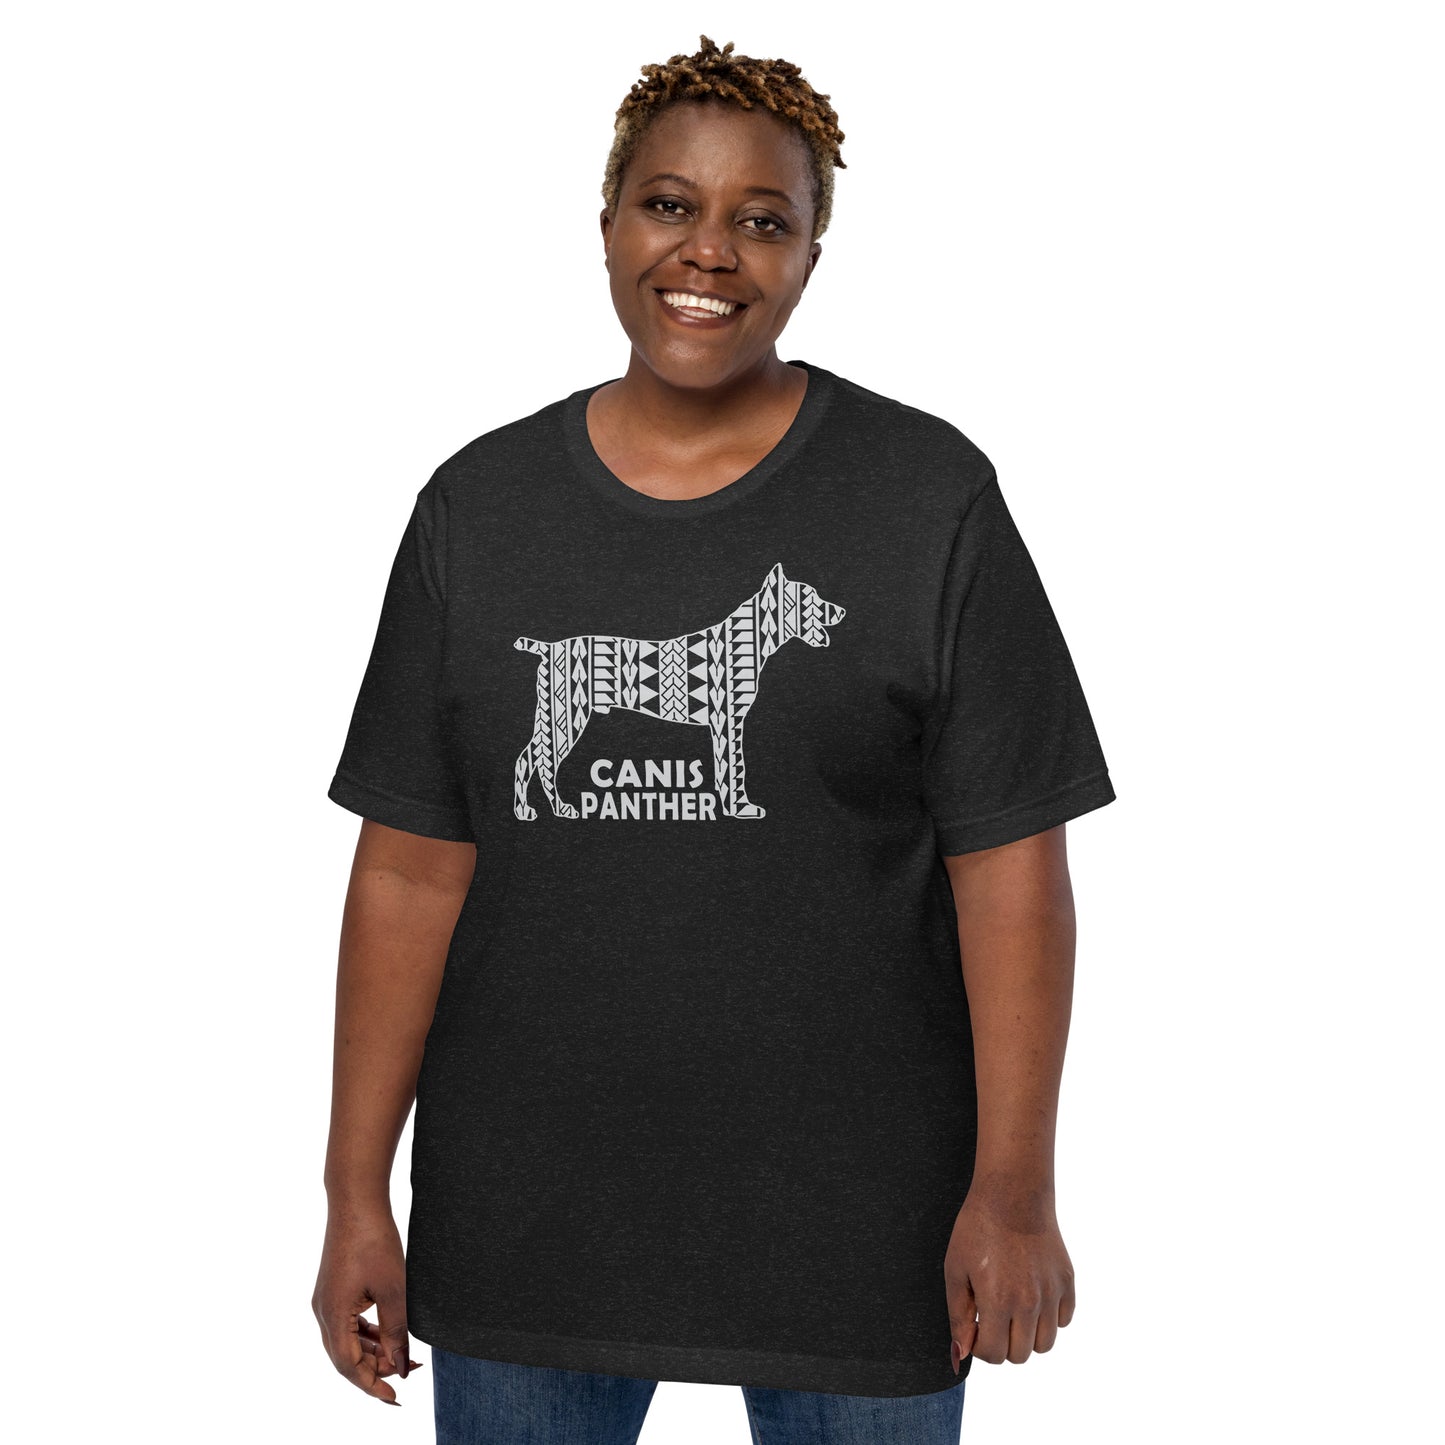 Canis Panther Polynesian t-shirt heather by Dog Artistry.